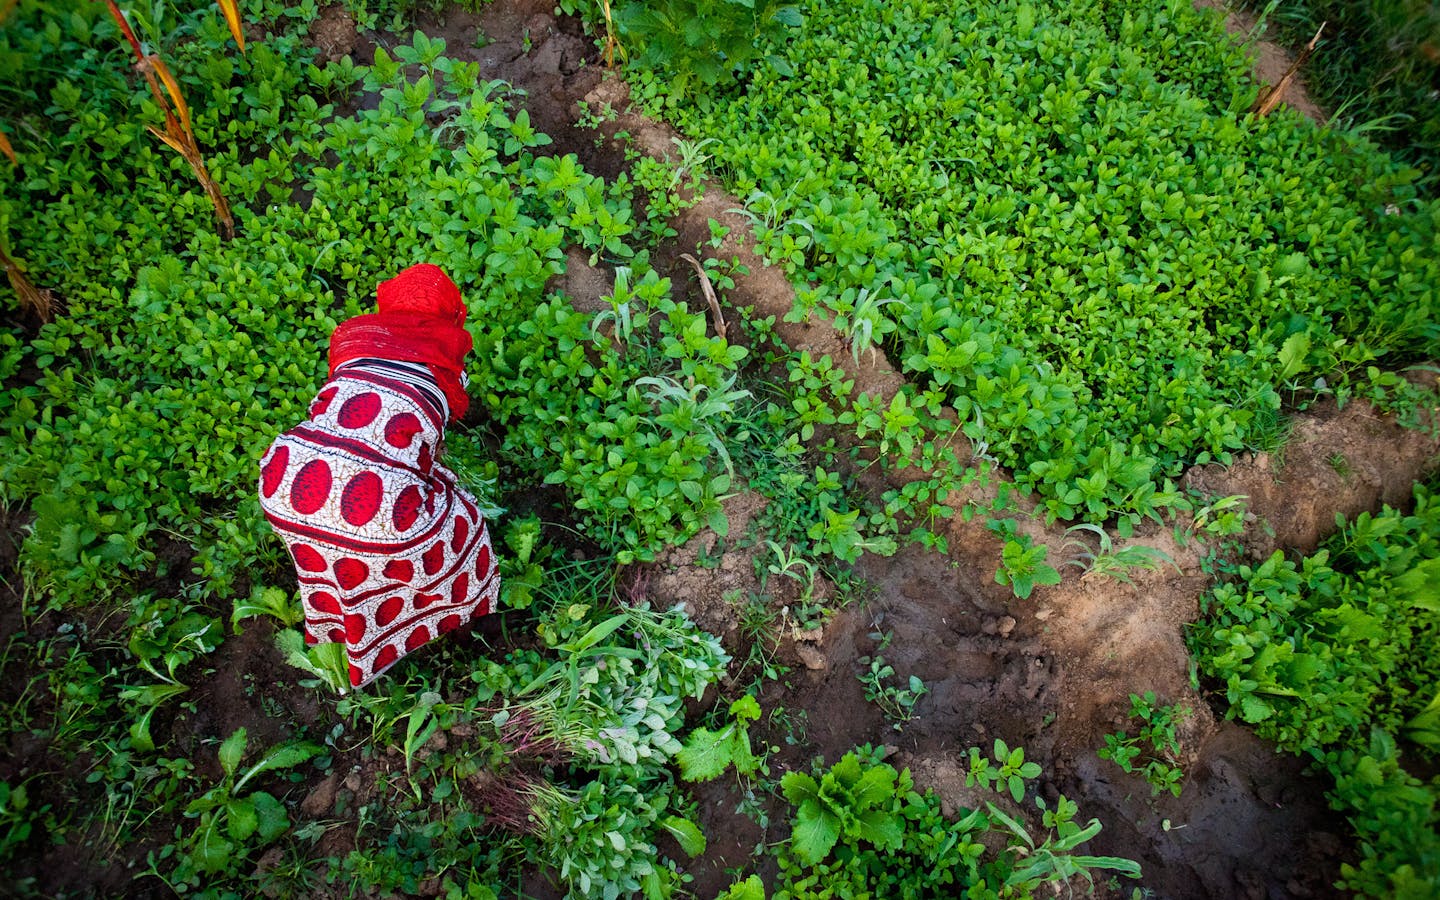 Woman harvests crops in Tanzania, the site of a Conservation International project.